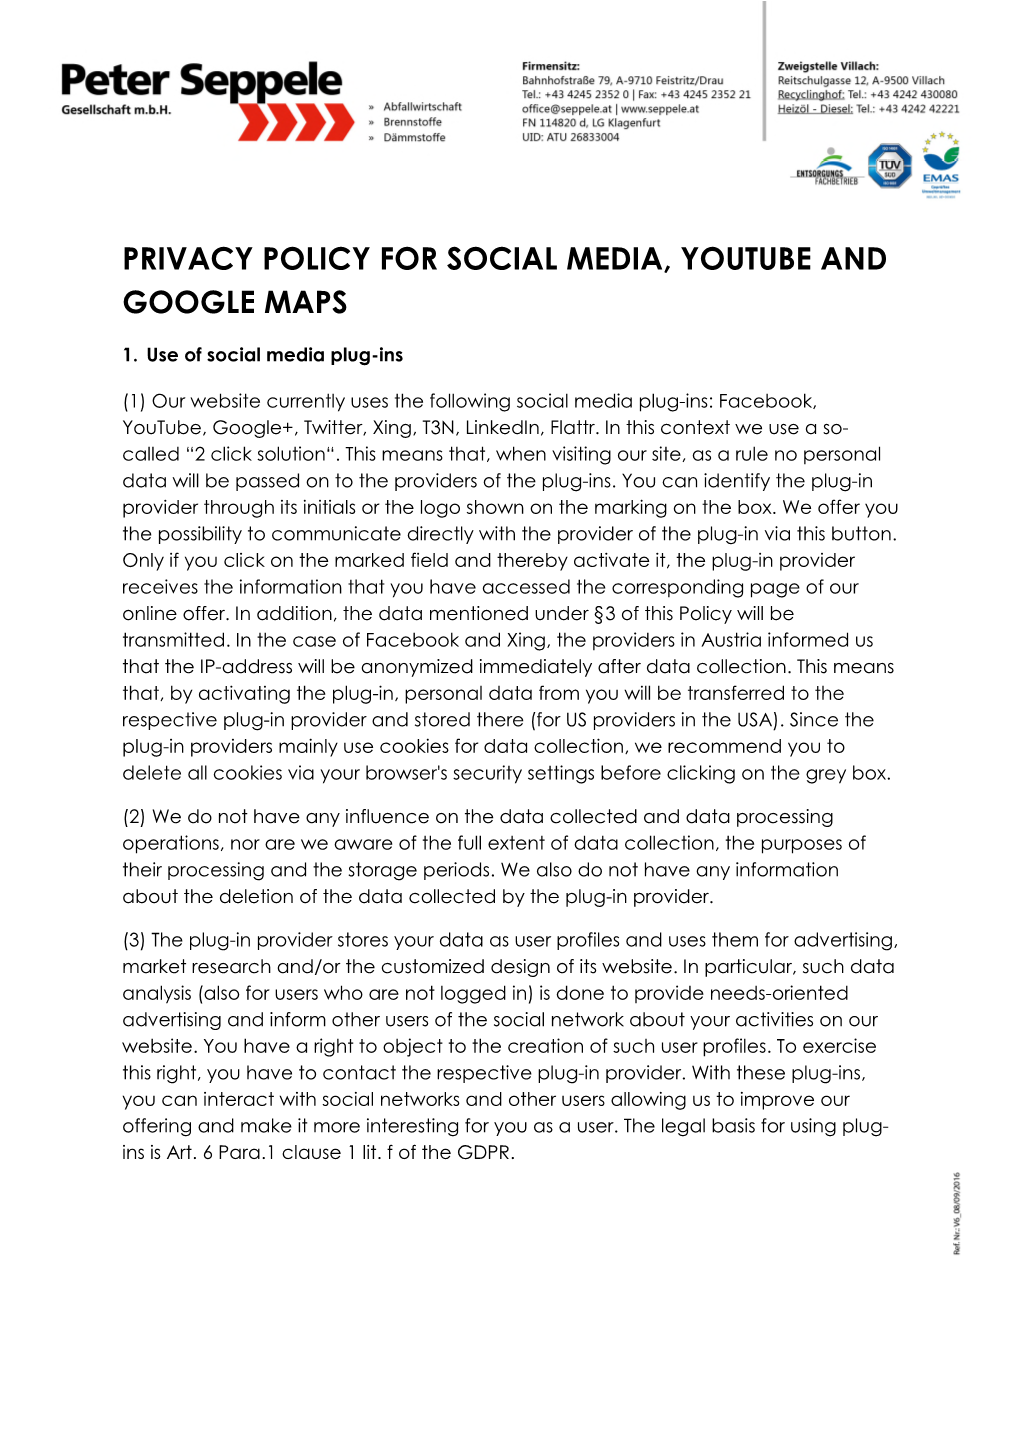 Privacy Policy for Social Media, Youtube and Google Maps